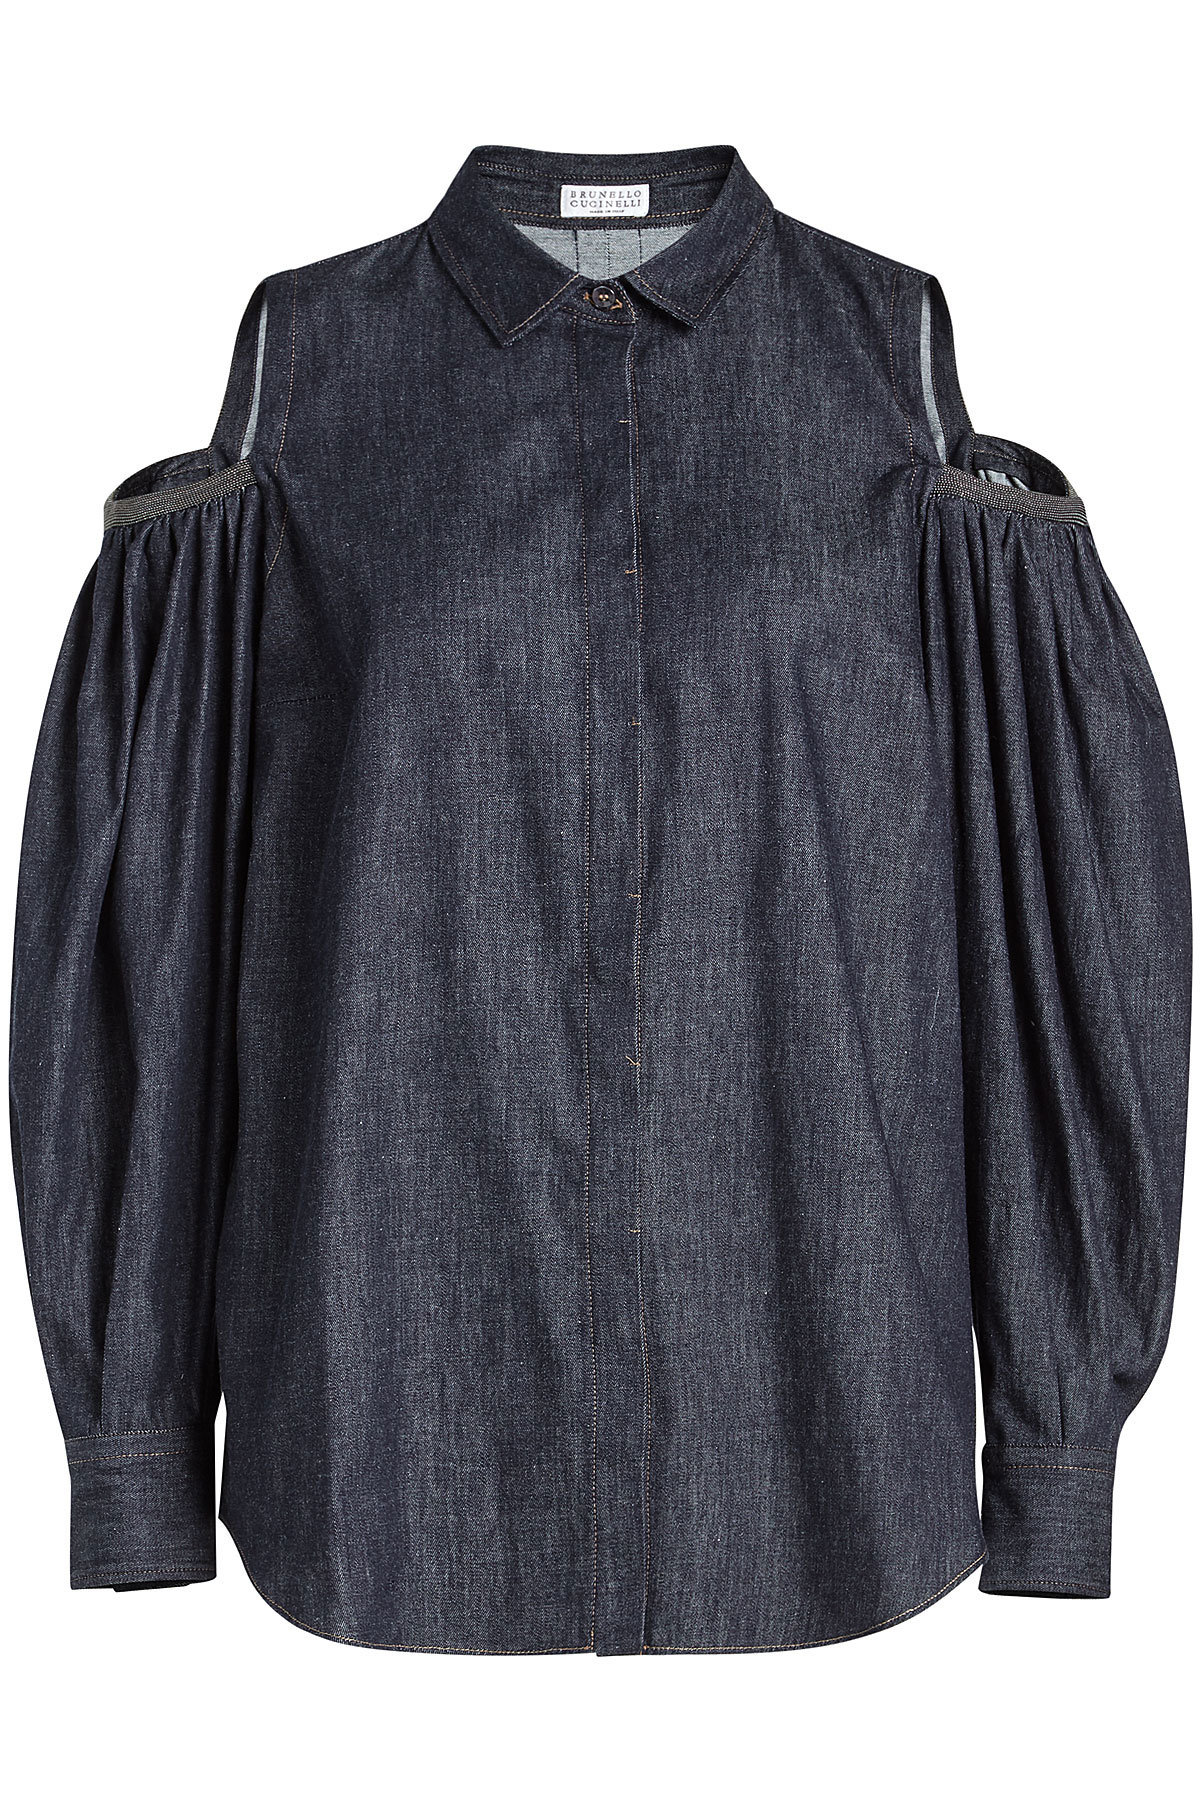 Cold Shoulder Denim Top with Embellishment by Brunello Cucinelli